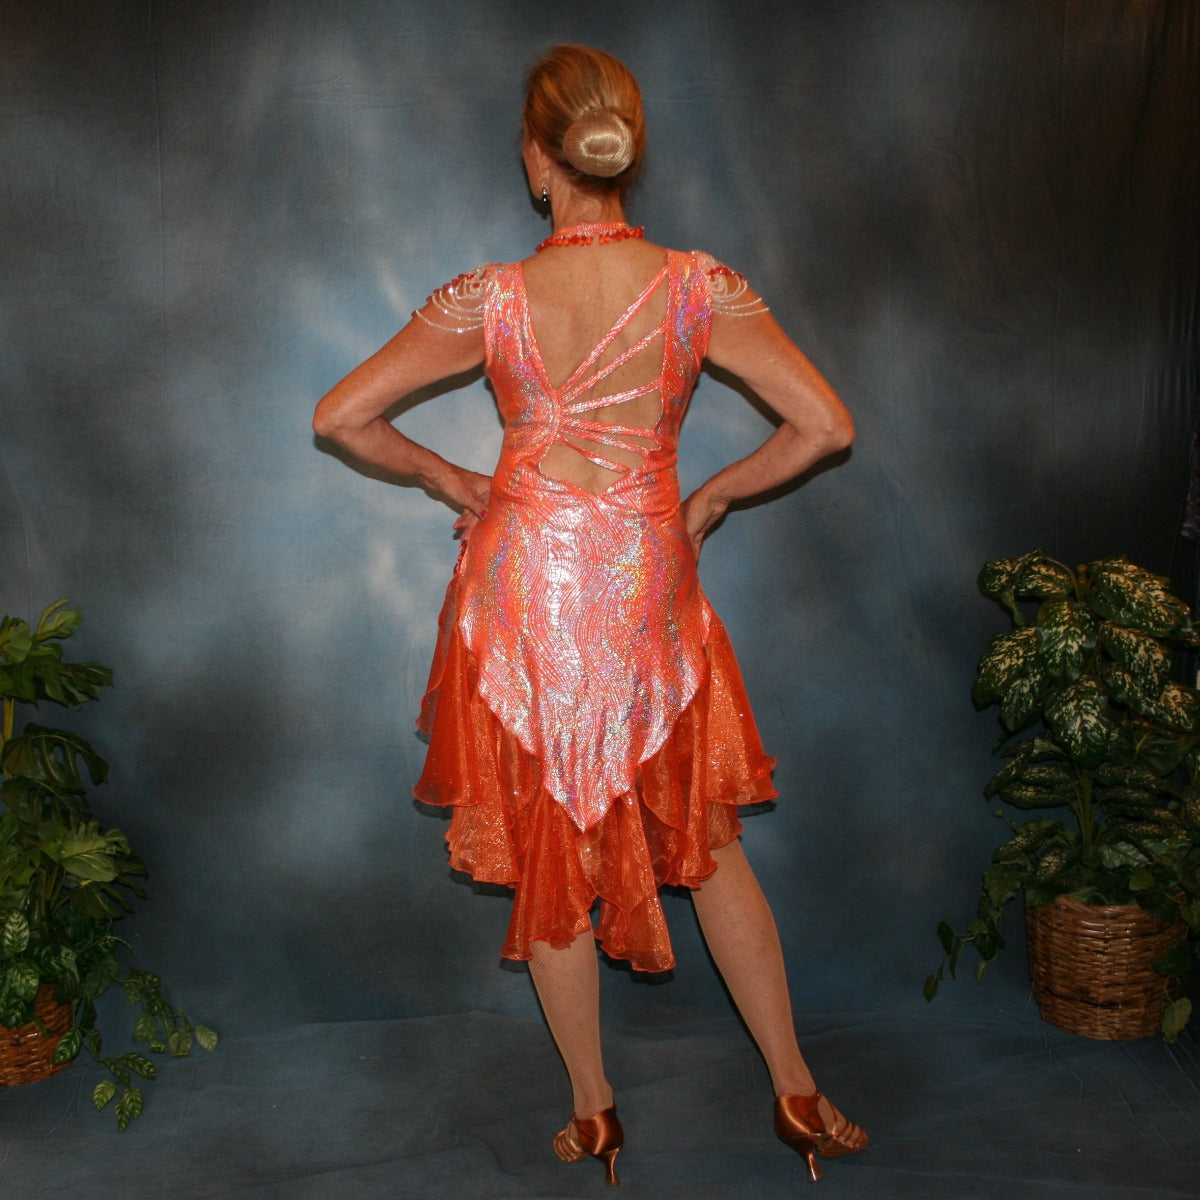 Crystal's Creations back view of Orange Latin/rhythm dress was created in orange & silver metallic print lycra with oodles of glitter organza flounces & accents, has back strap detailing, embellished with extensive Swarovski hand beading & has matching Swarovski hand beaded neckpiece.